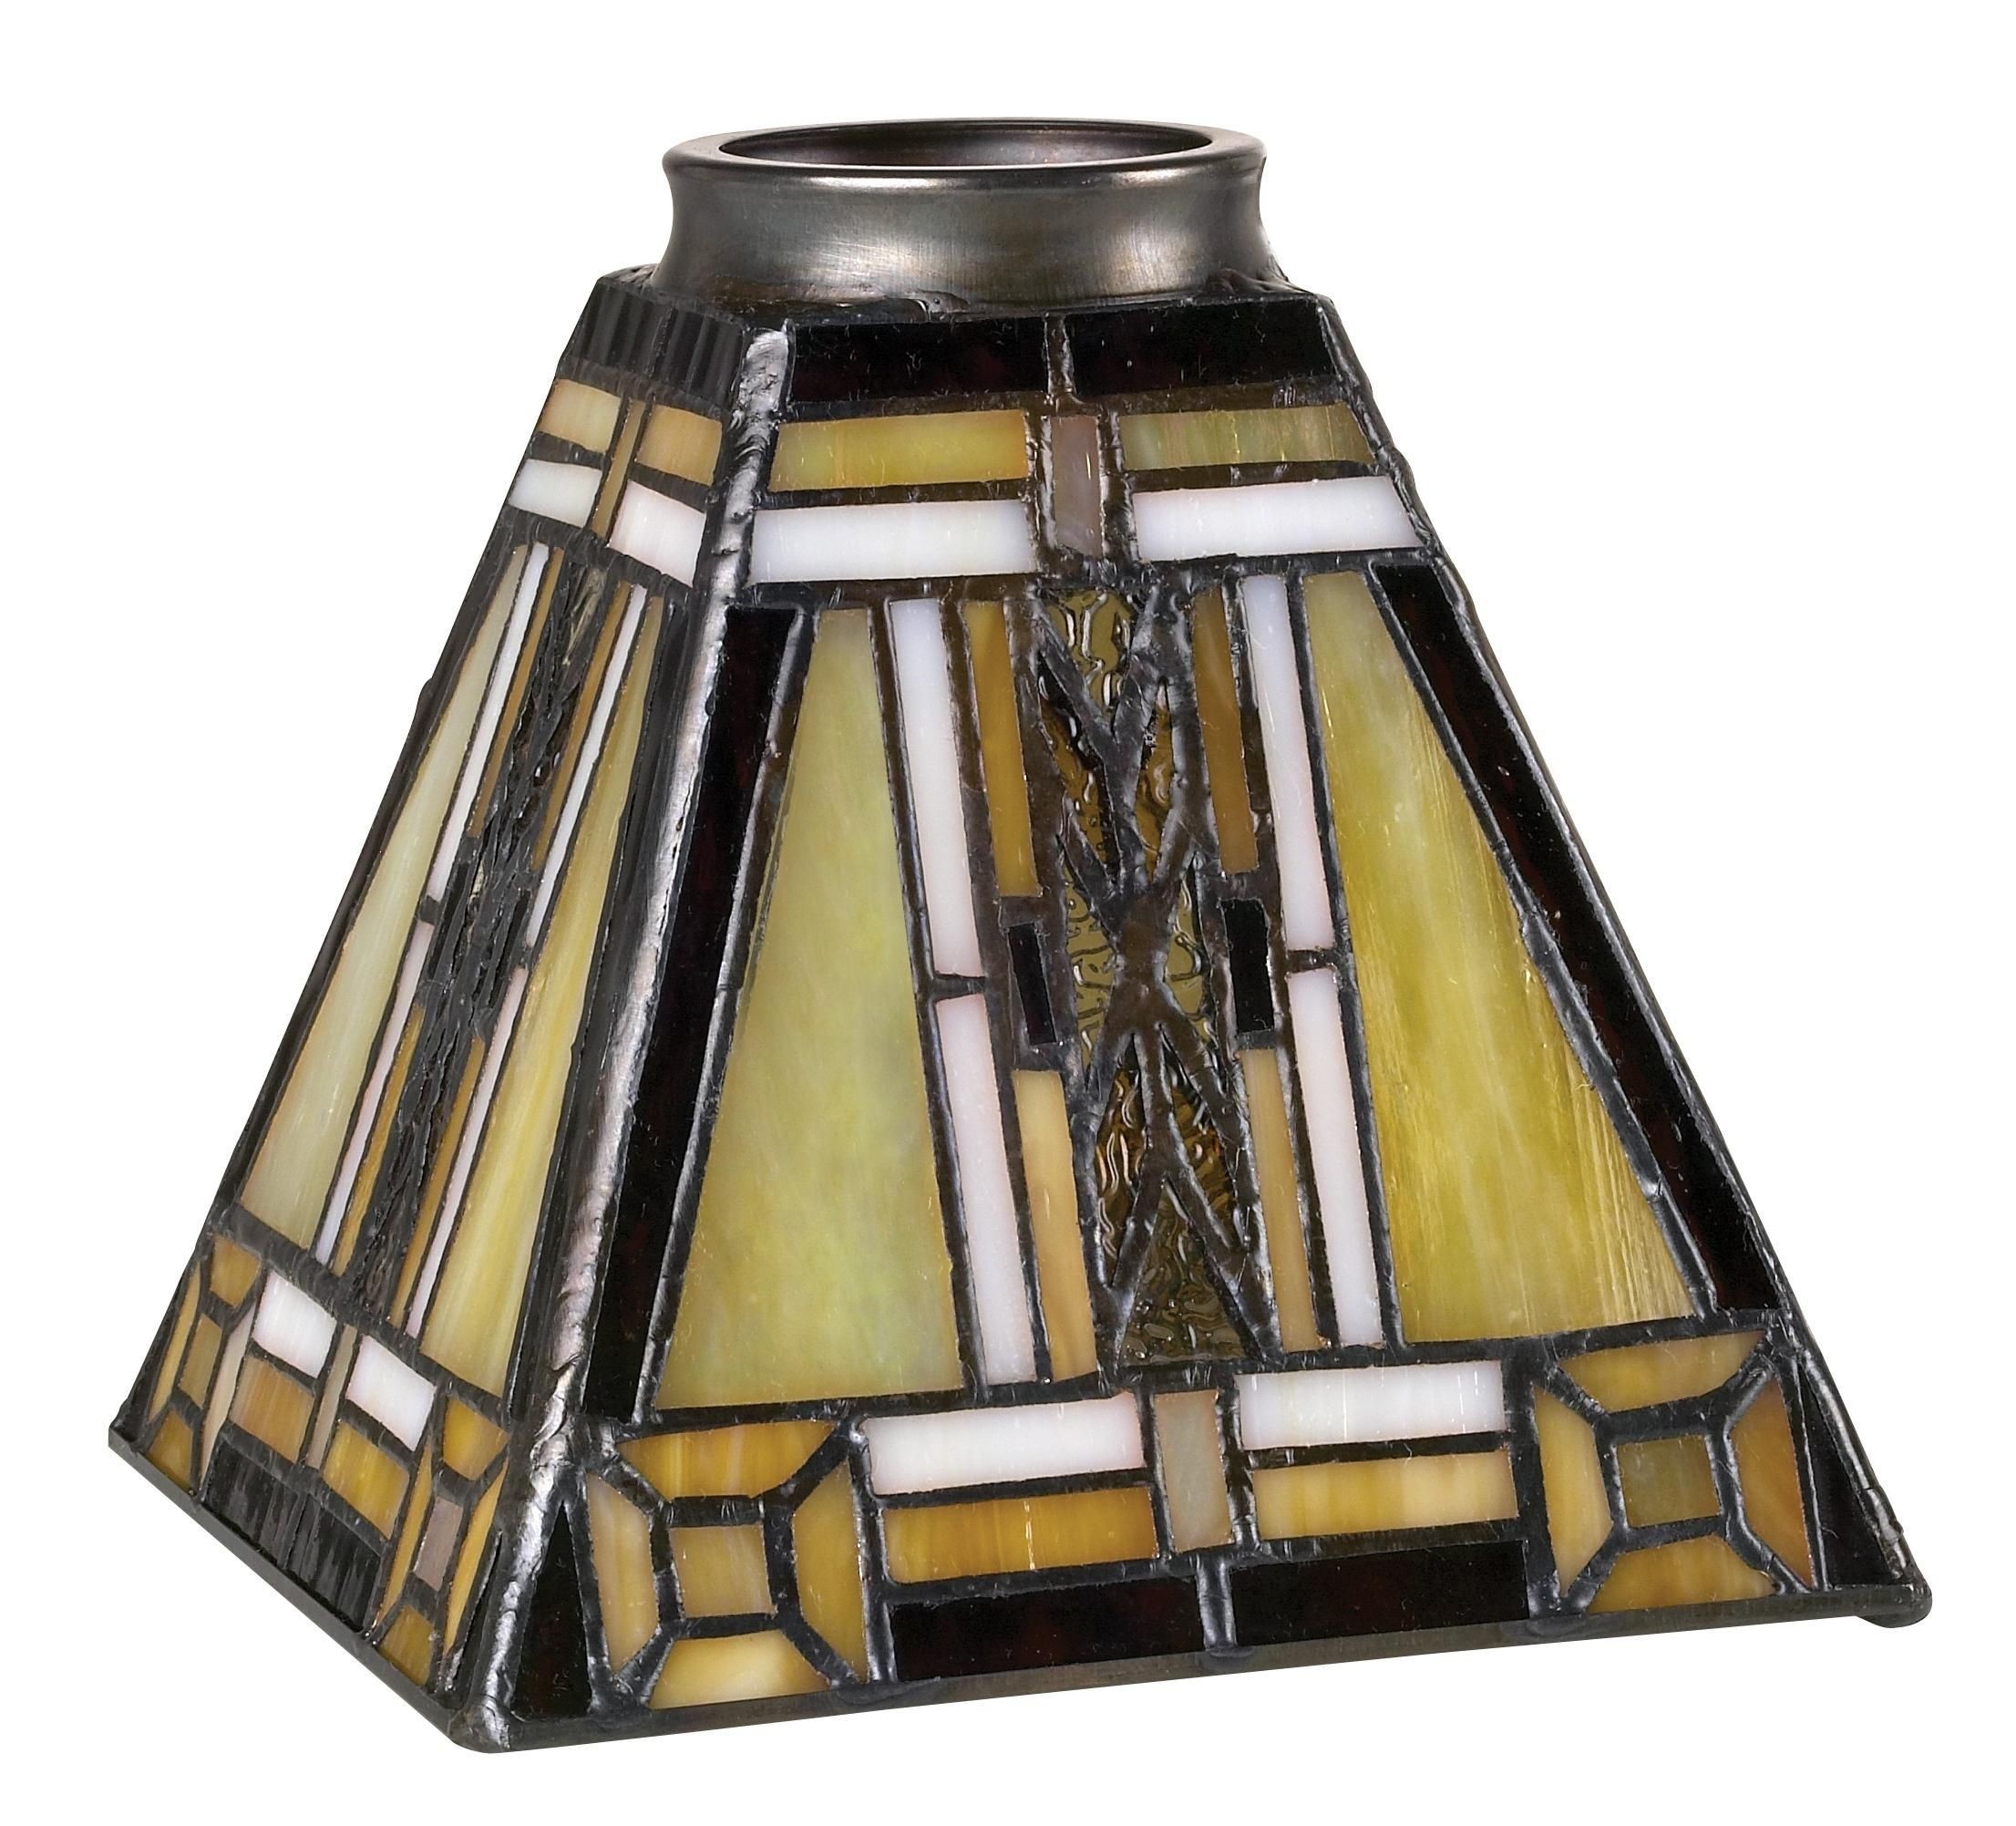 Stained glass fan lamp